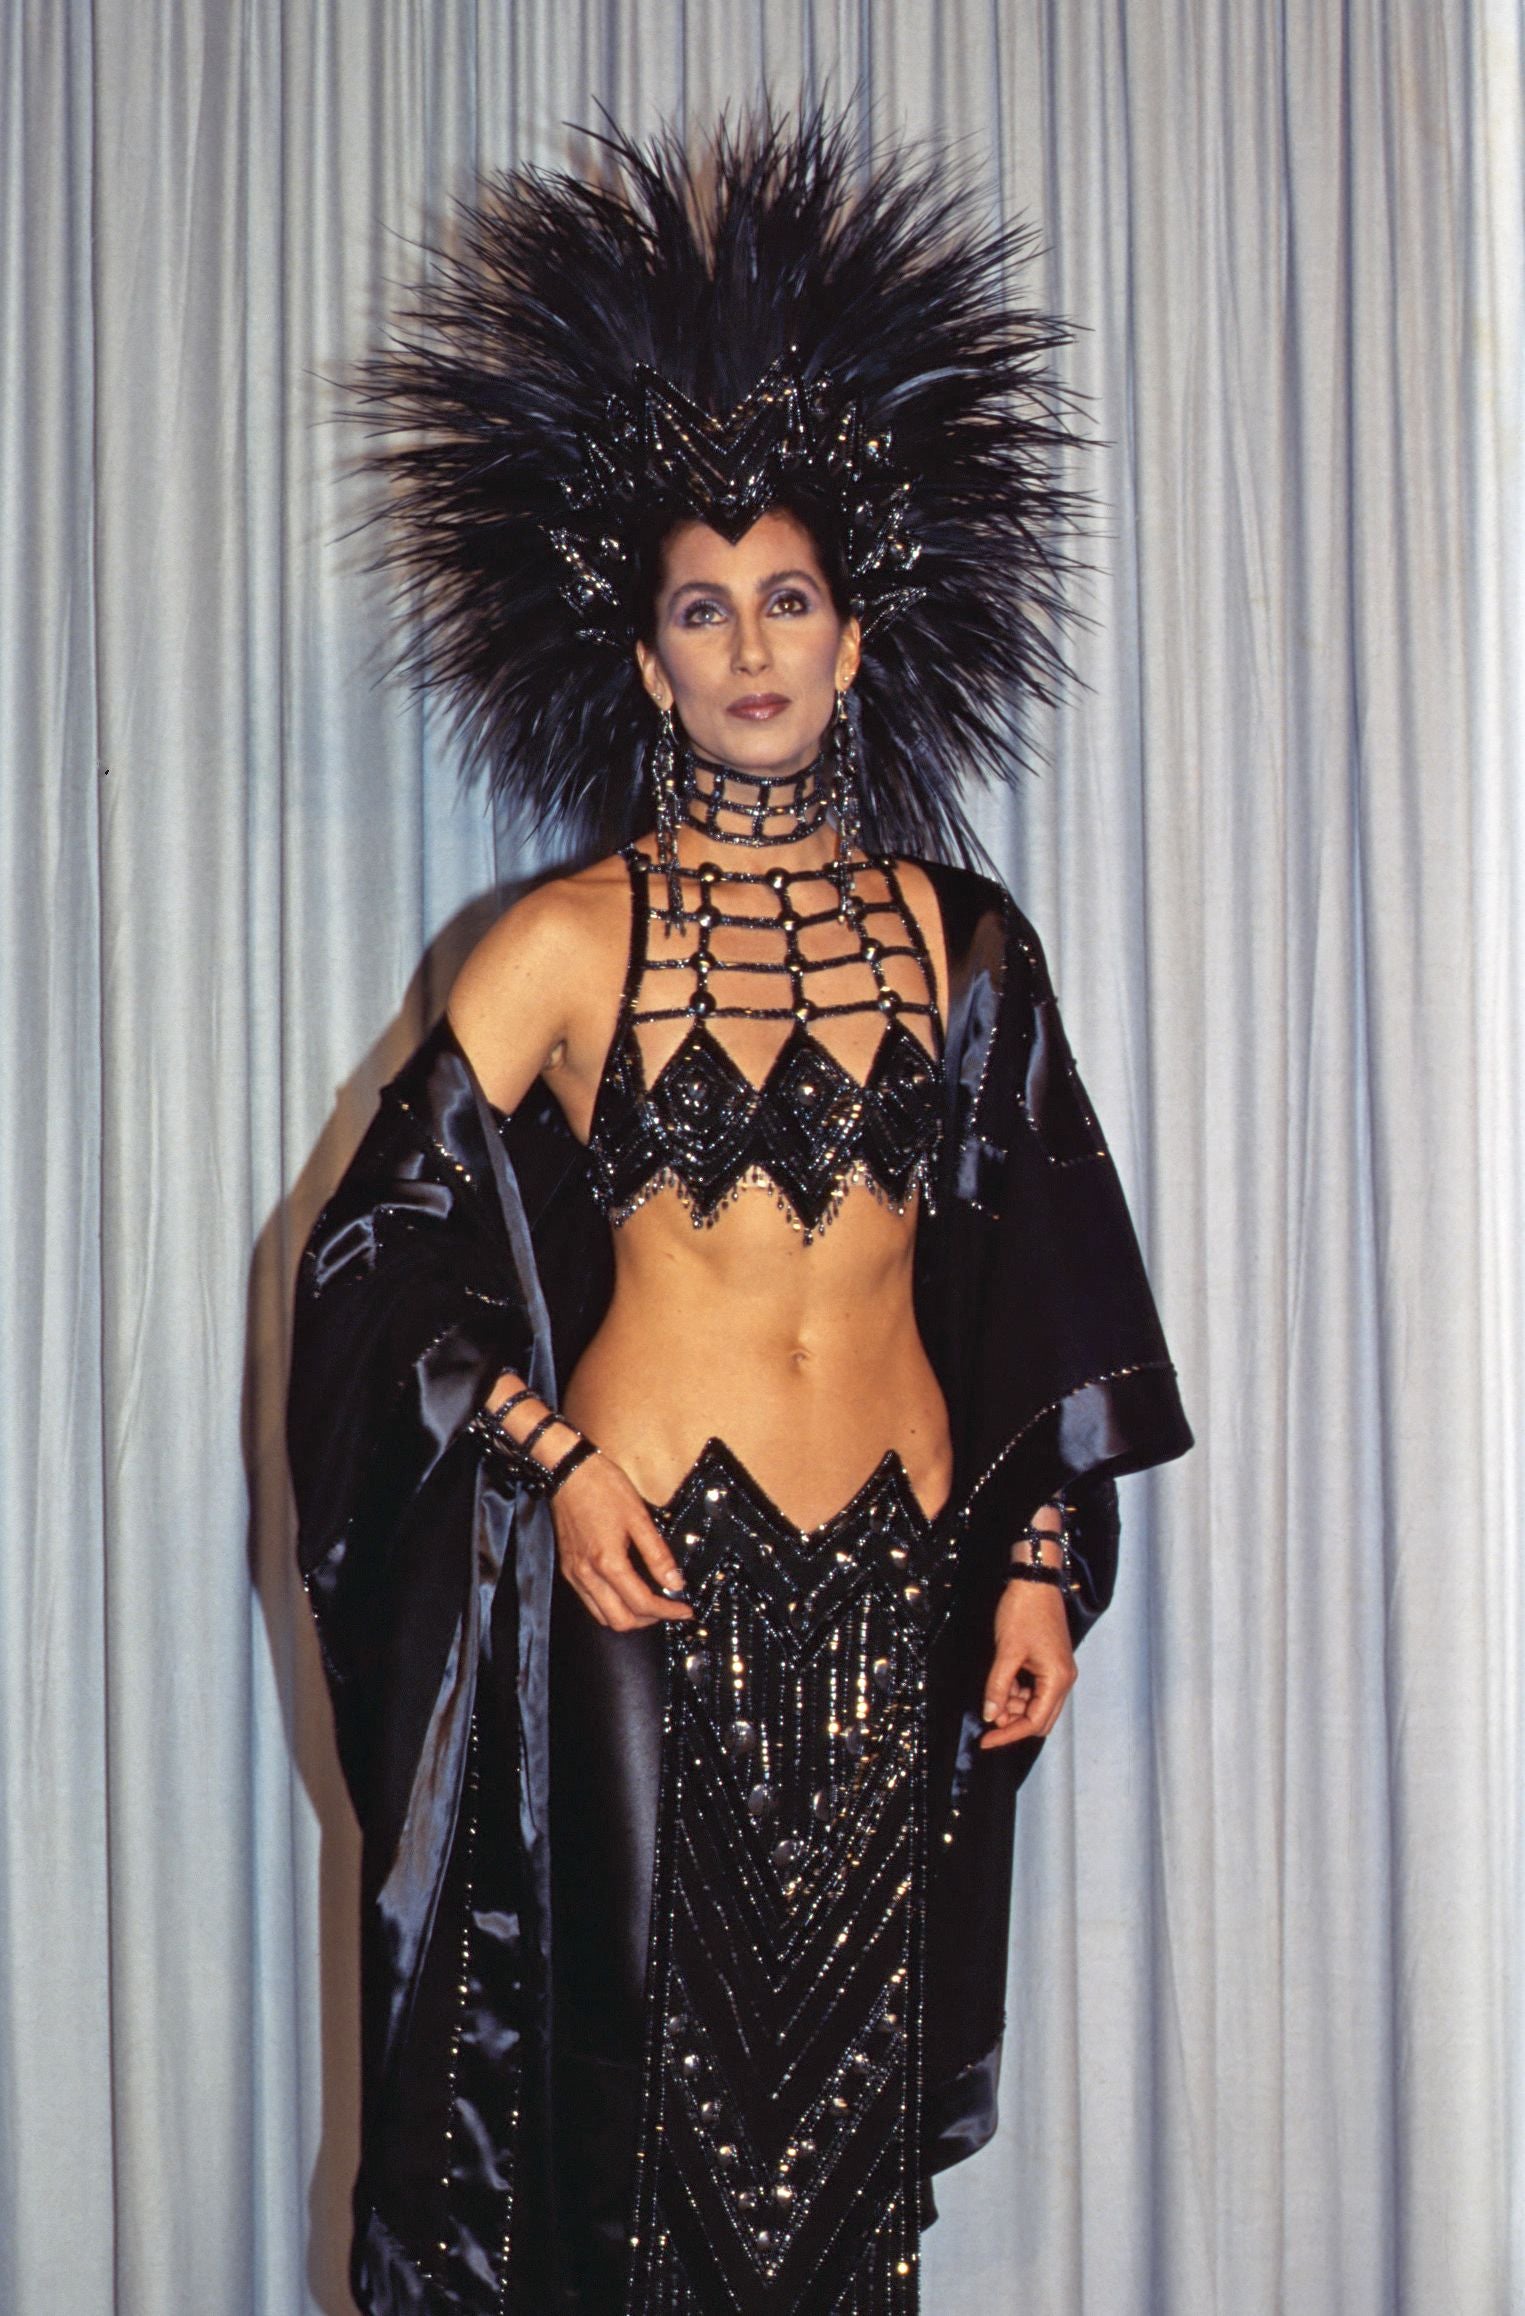 Cher in 1986, wearing an outfit by Bob Mackie